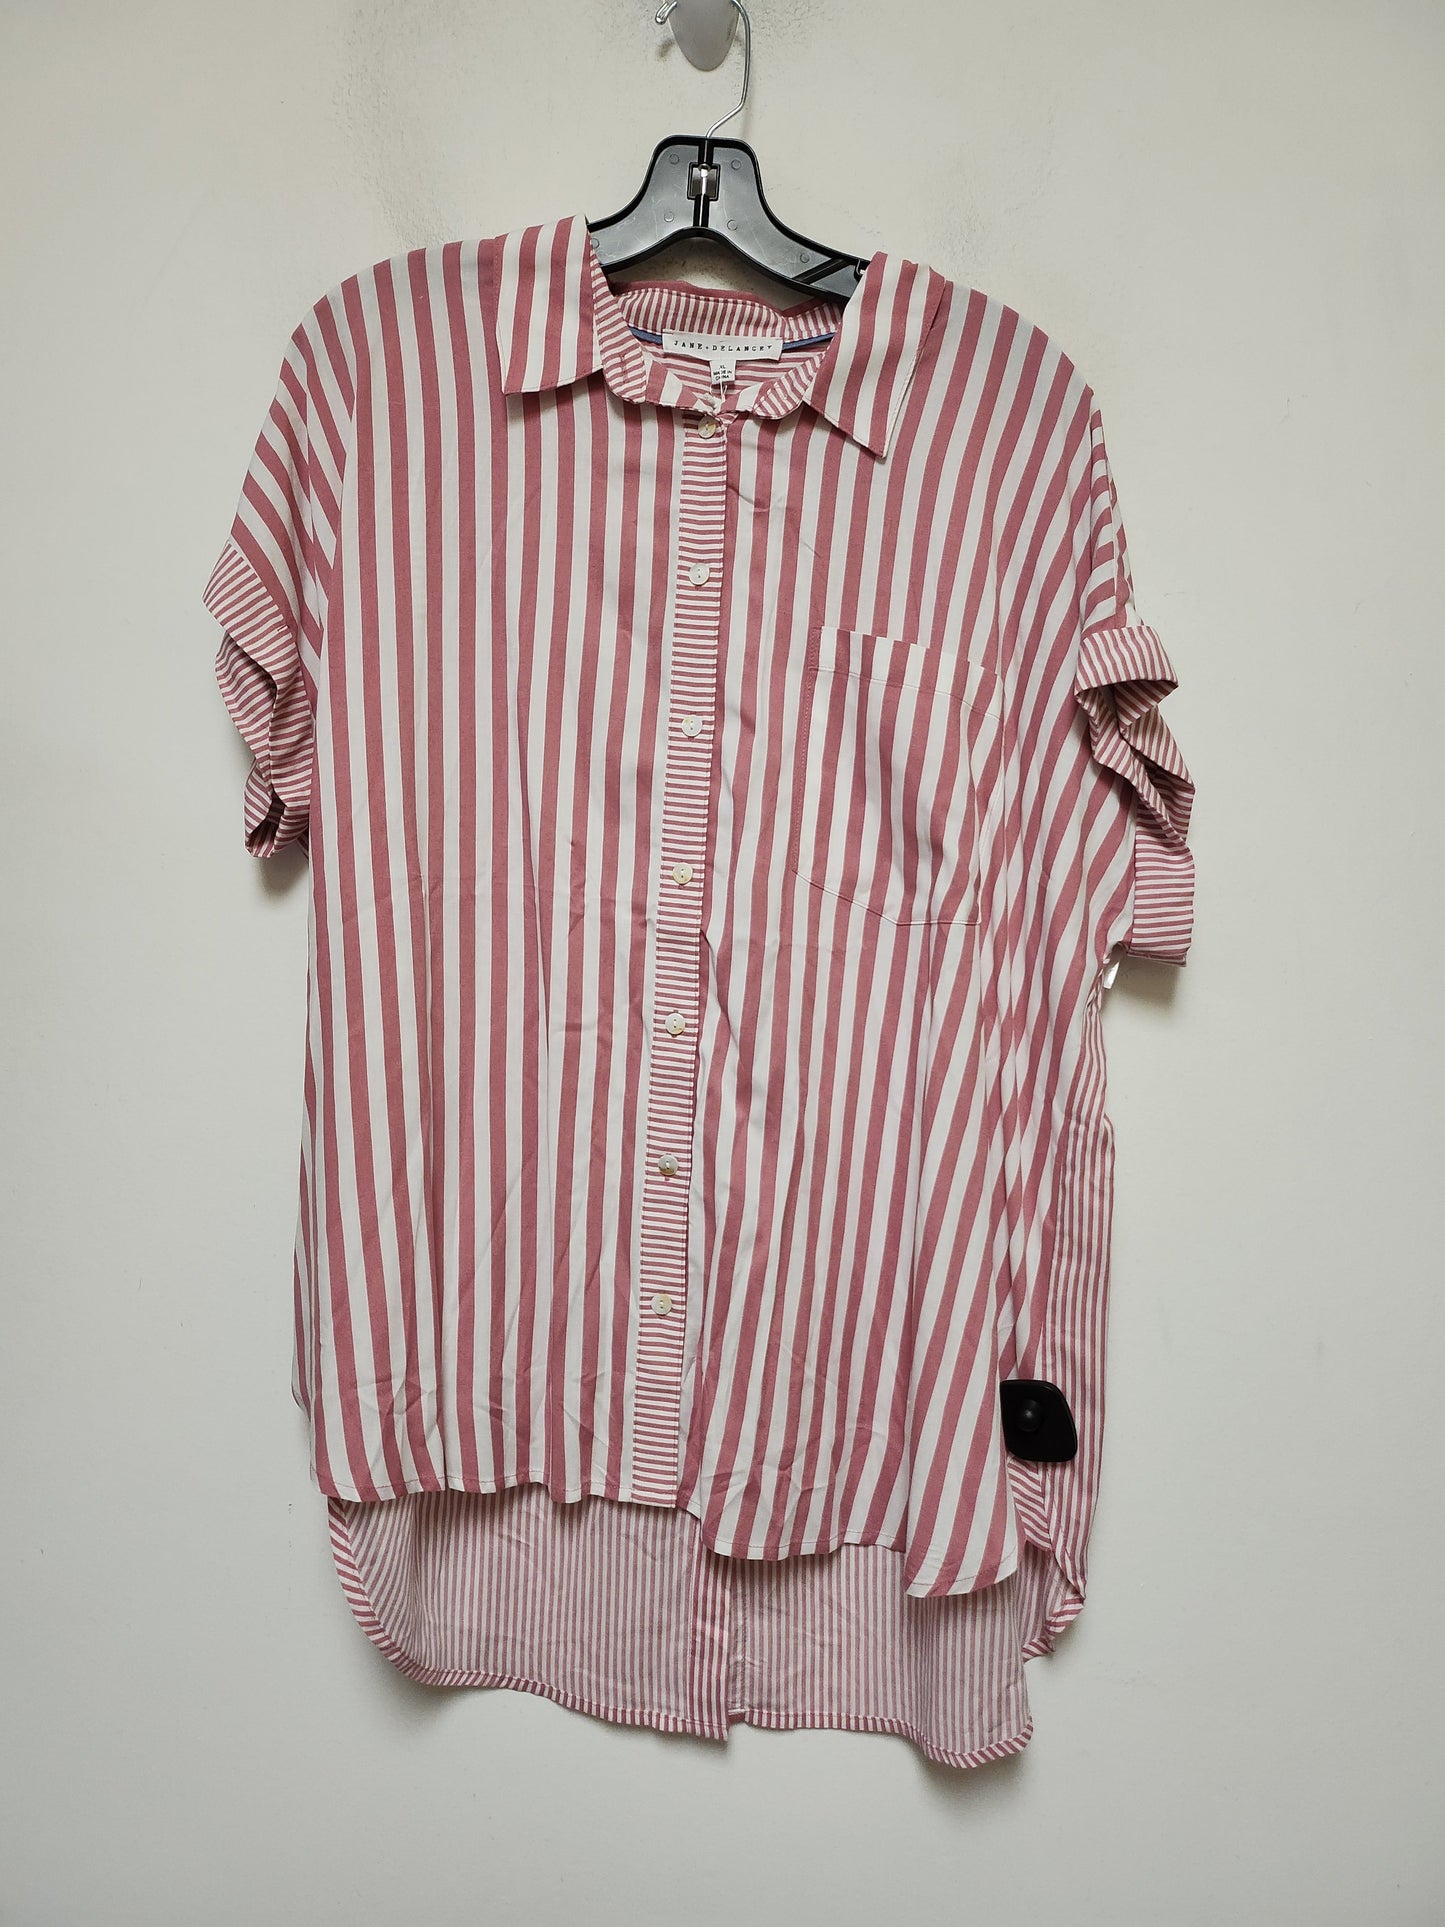 Striped Pattern Top Short Sleeve Jane And Delancey, Size Xl